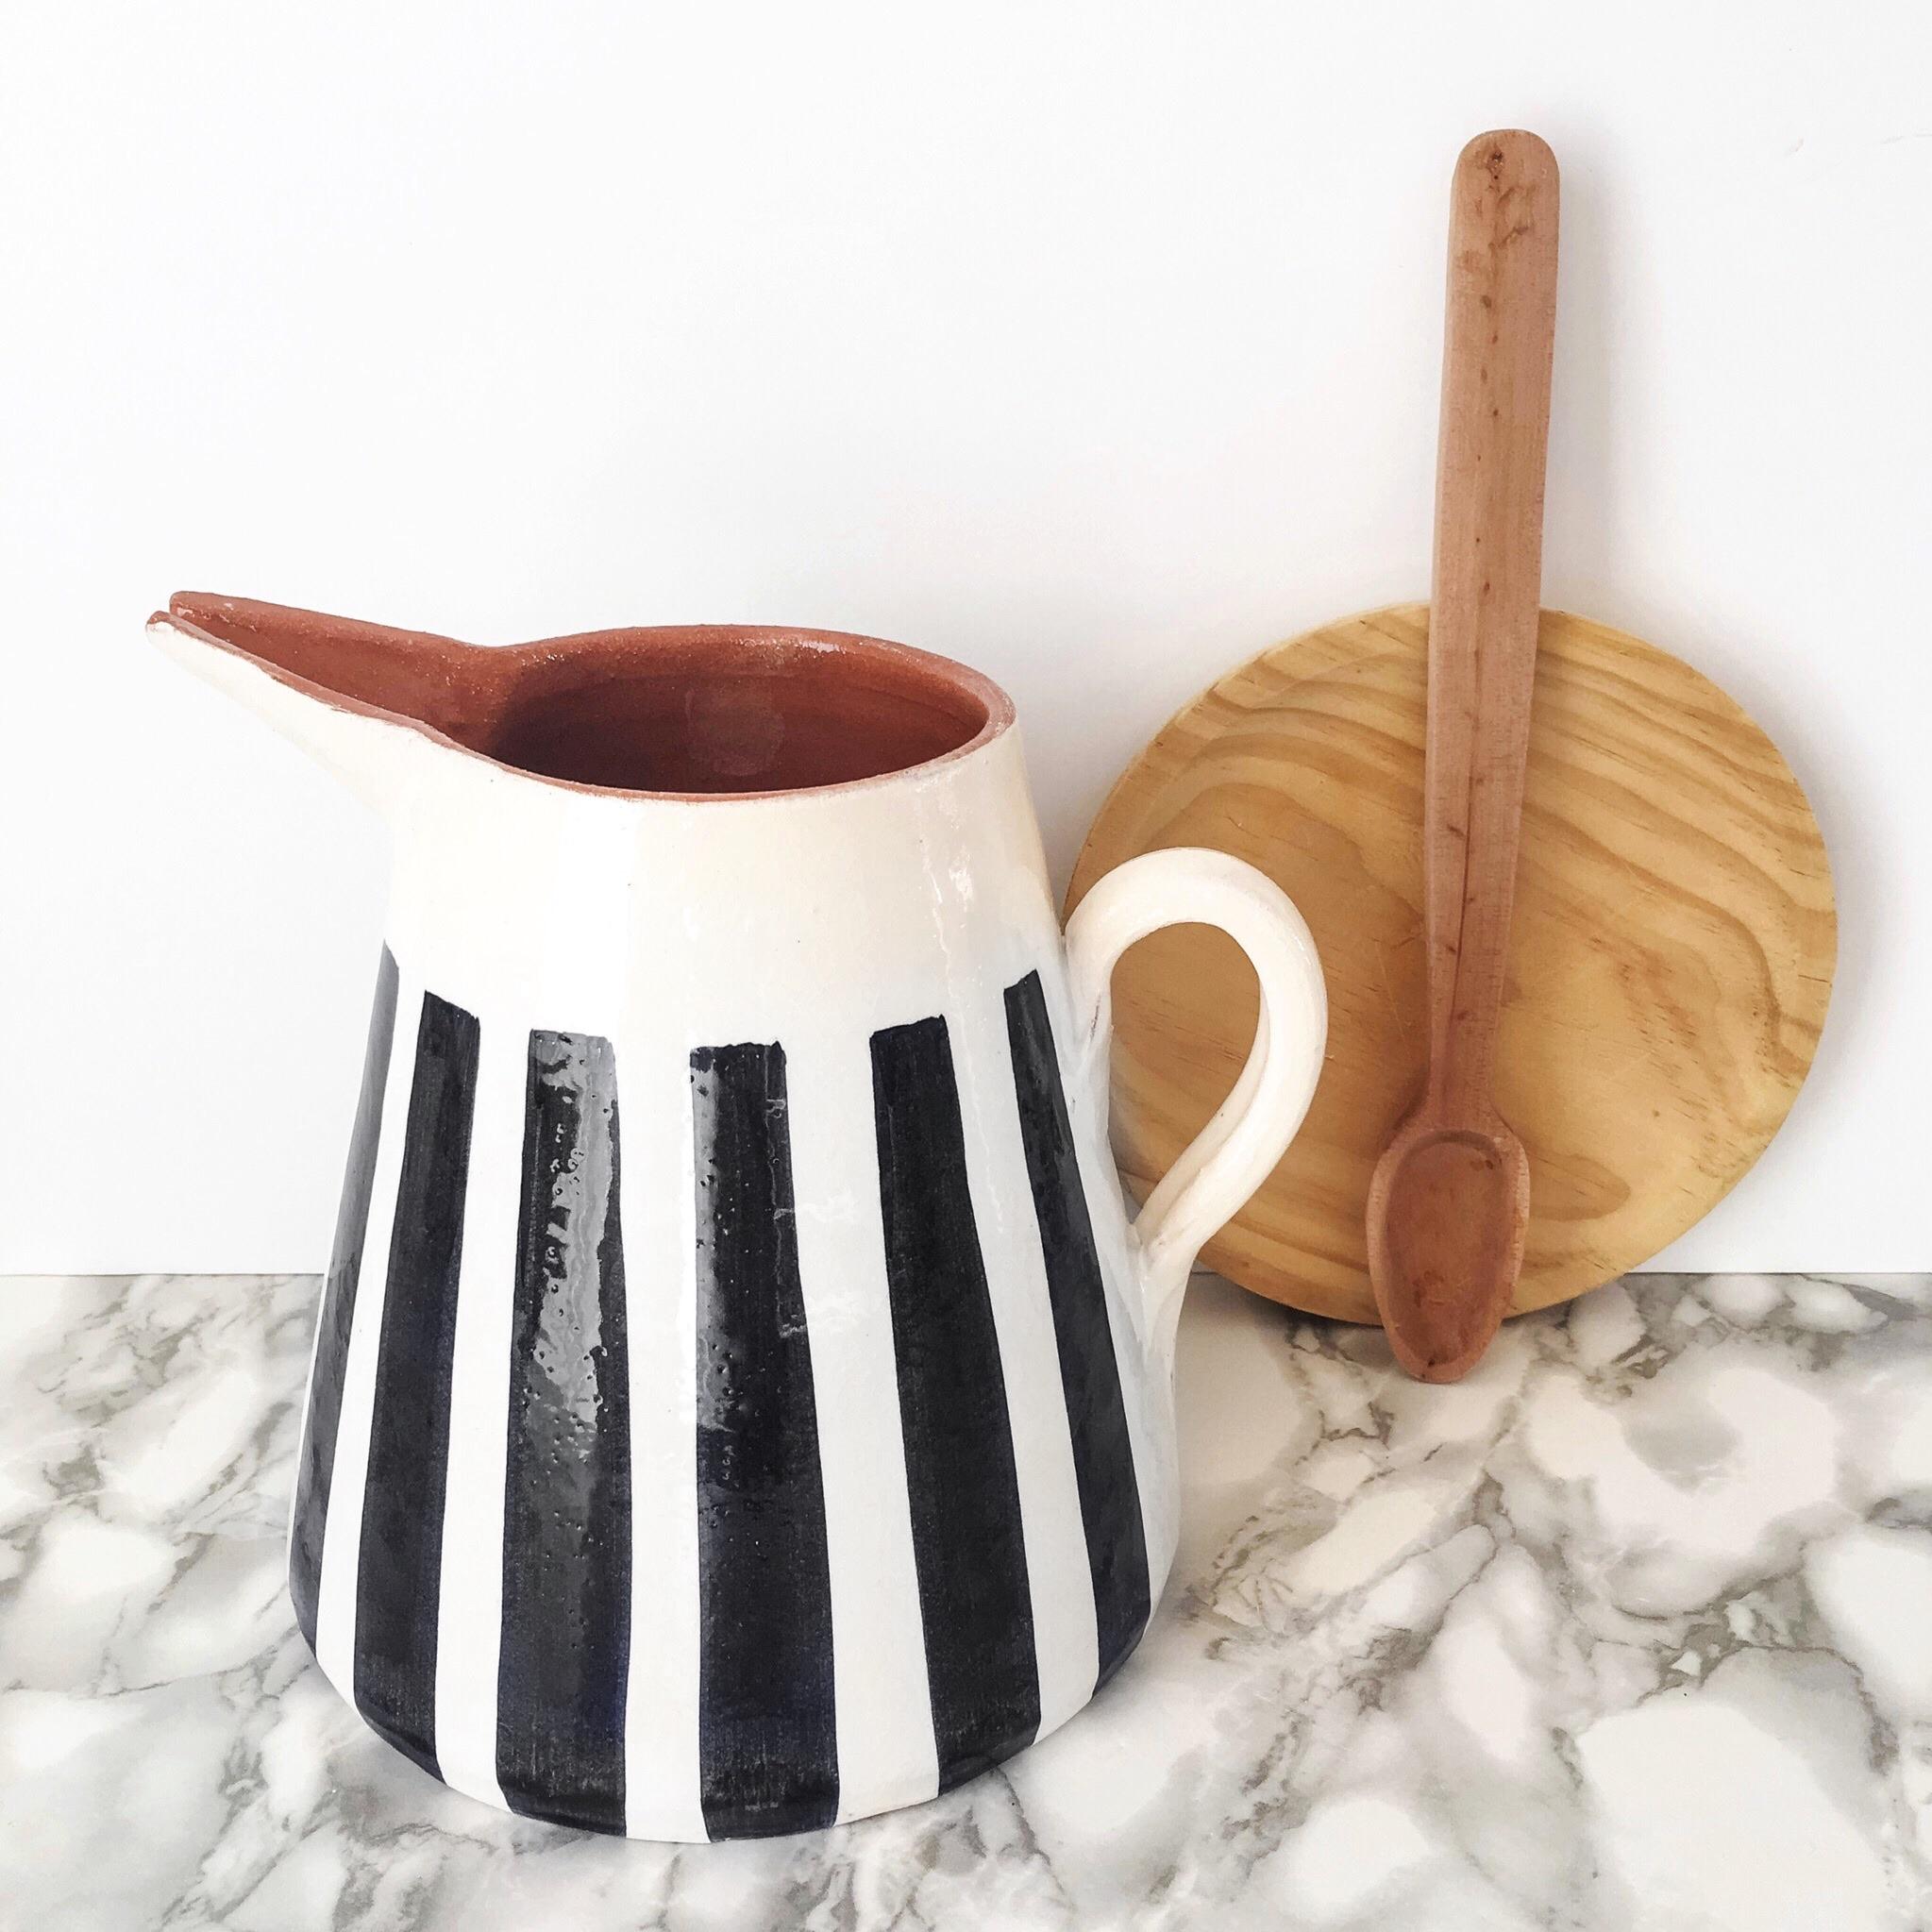 Hand-Crafted Handmade Ceramic Small Pitcher with Graphic Black and White Design, in Stock